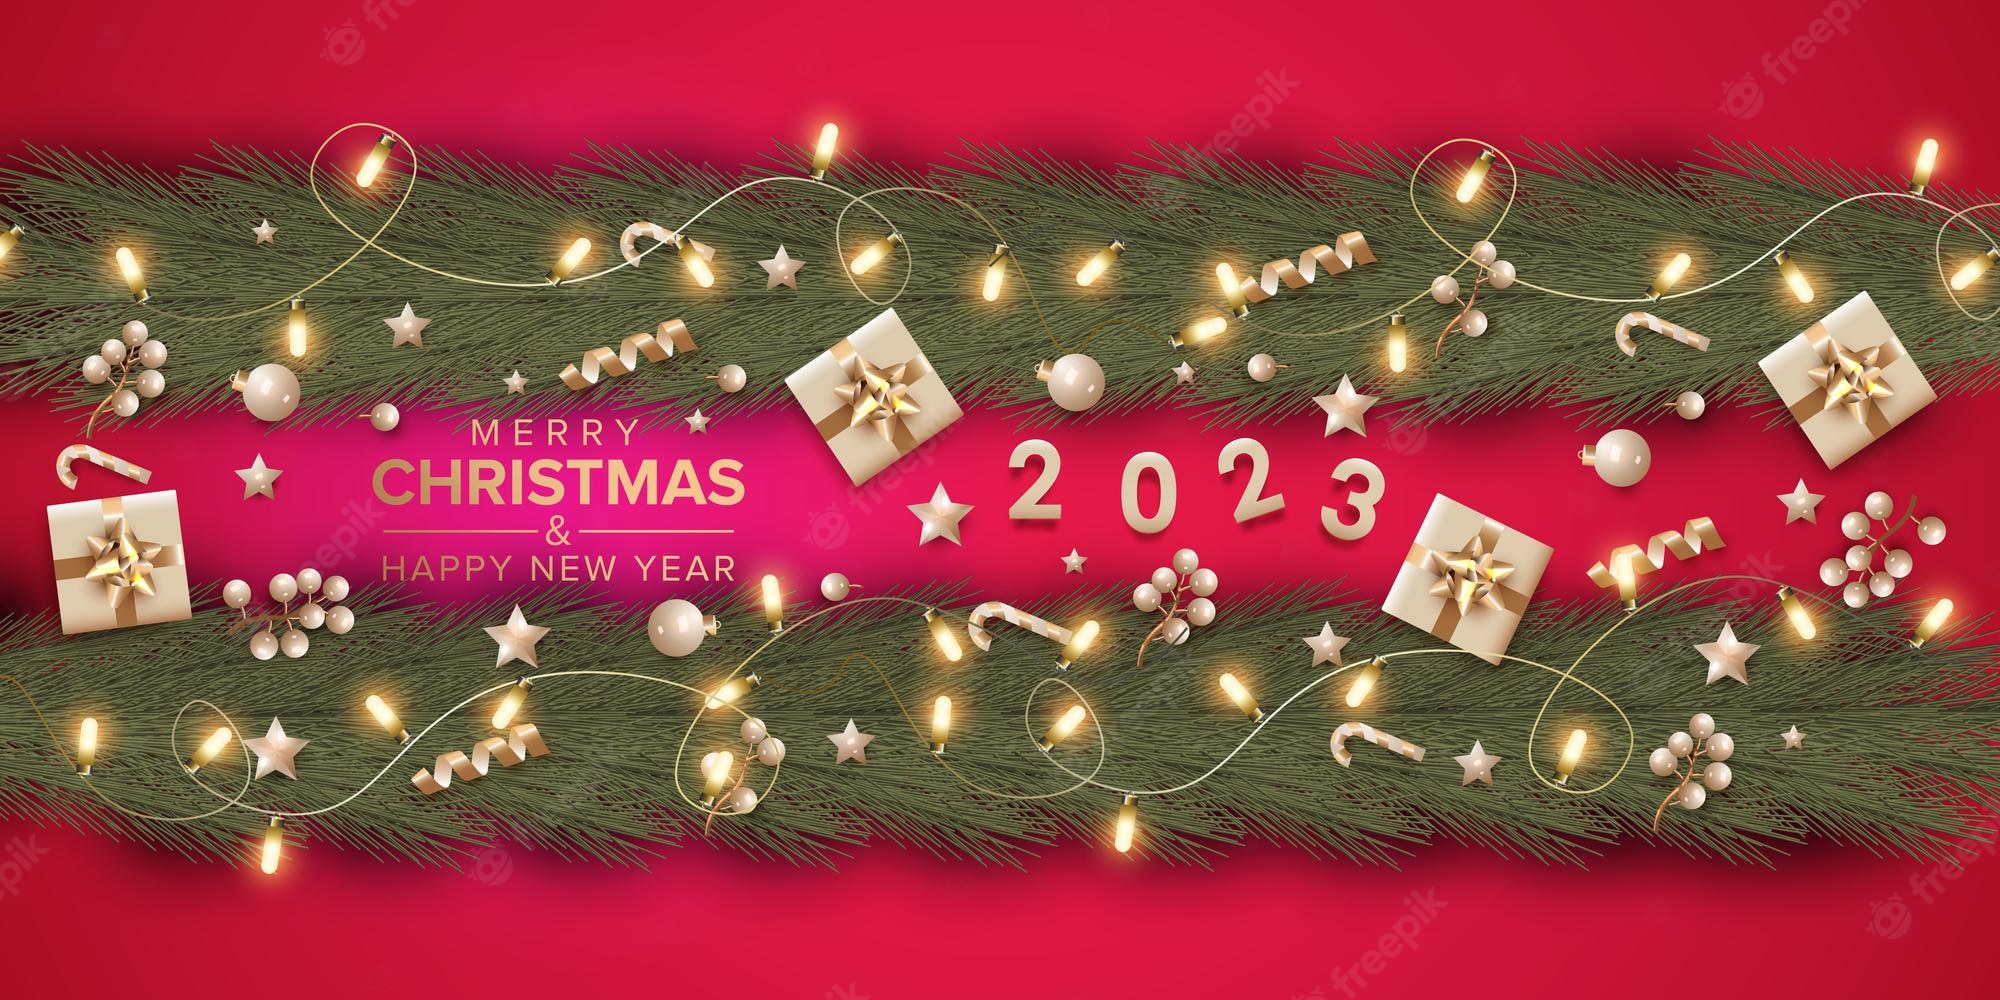 Premium Vector. Merry christmas and happy new year 2023 with realistic decoration on red background